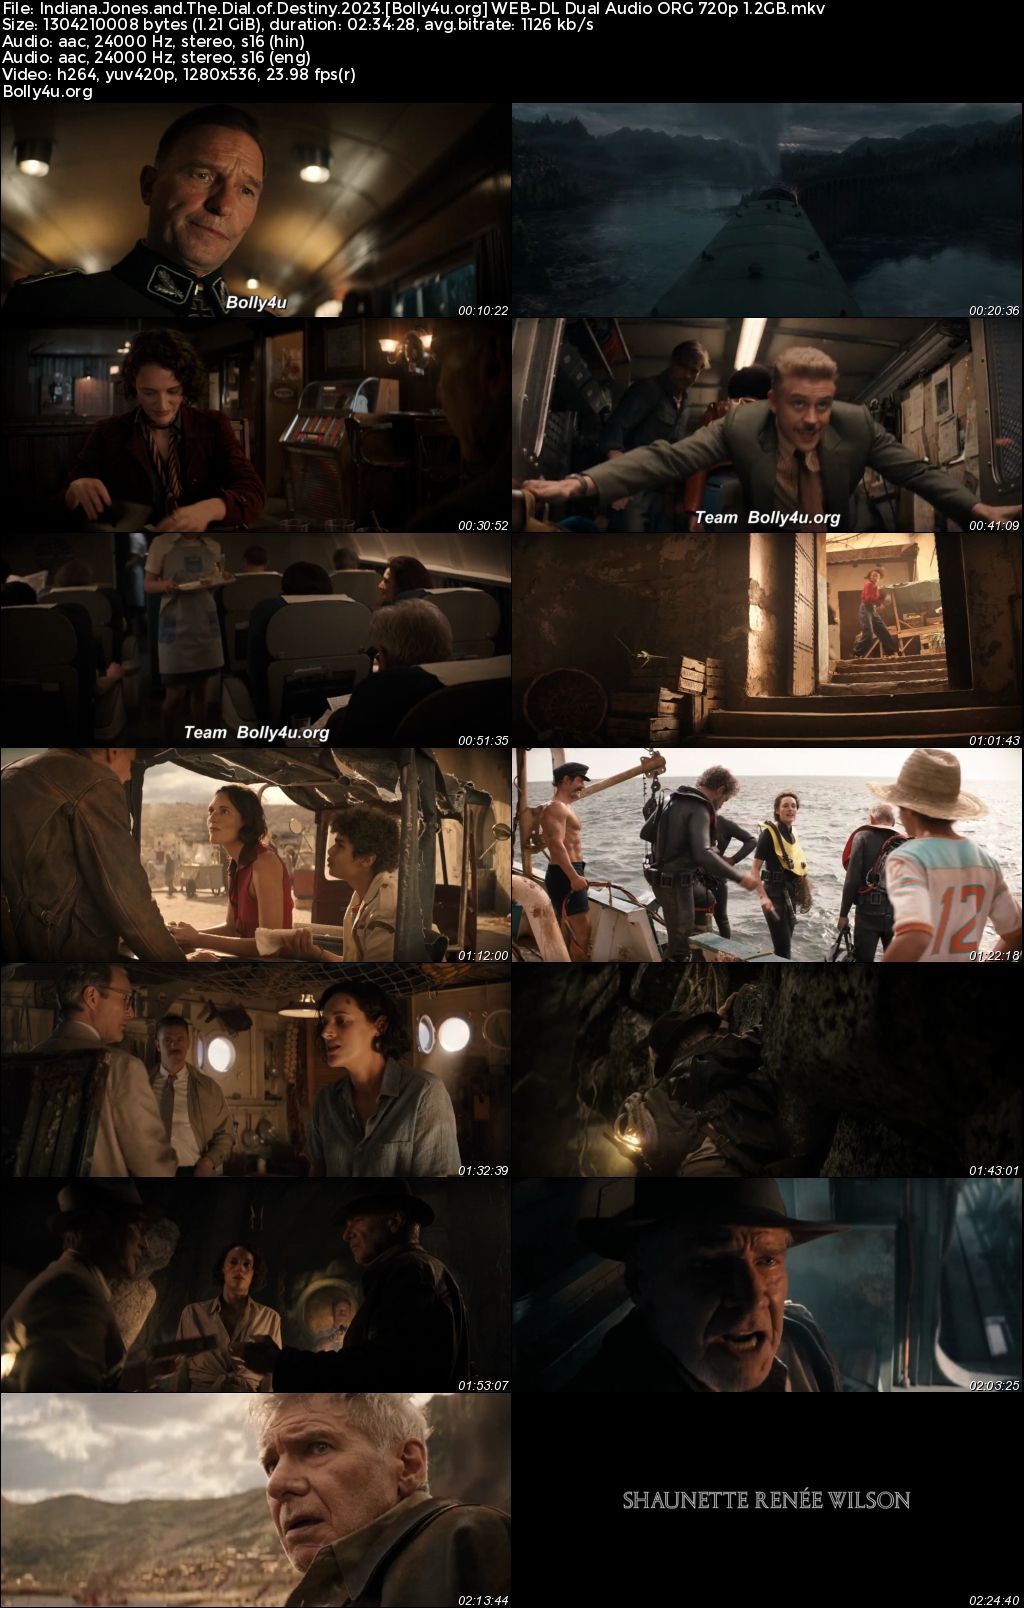 Indiana Jones and The Dial of Destiny 2023 WEB-DL Hindi Dual Audio ORG Full Movie Download 1080p 720p 480p